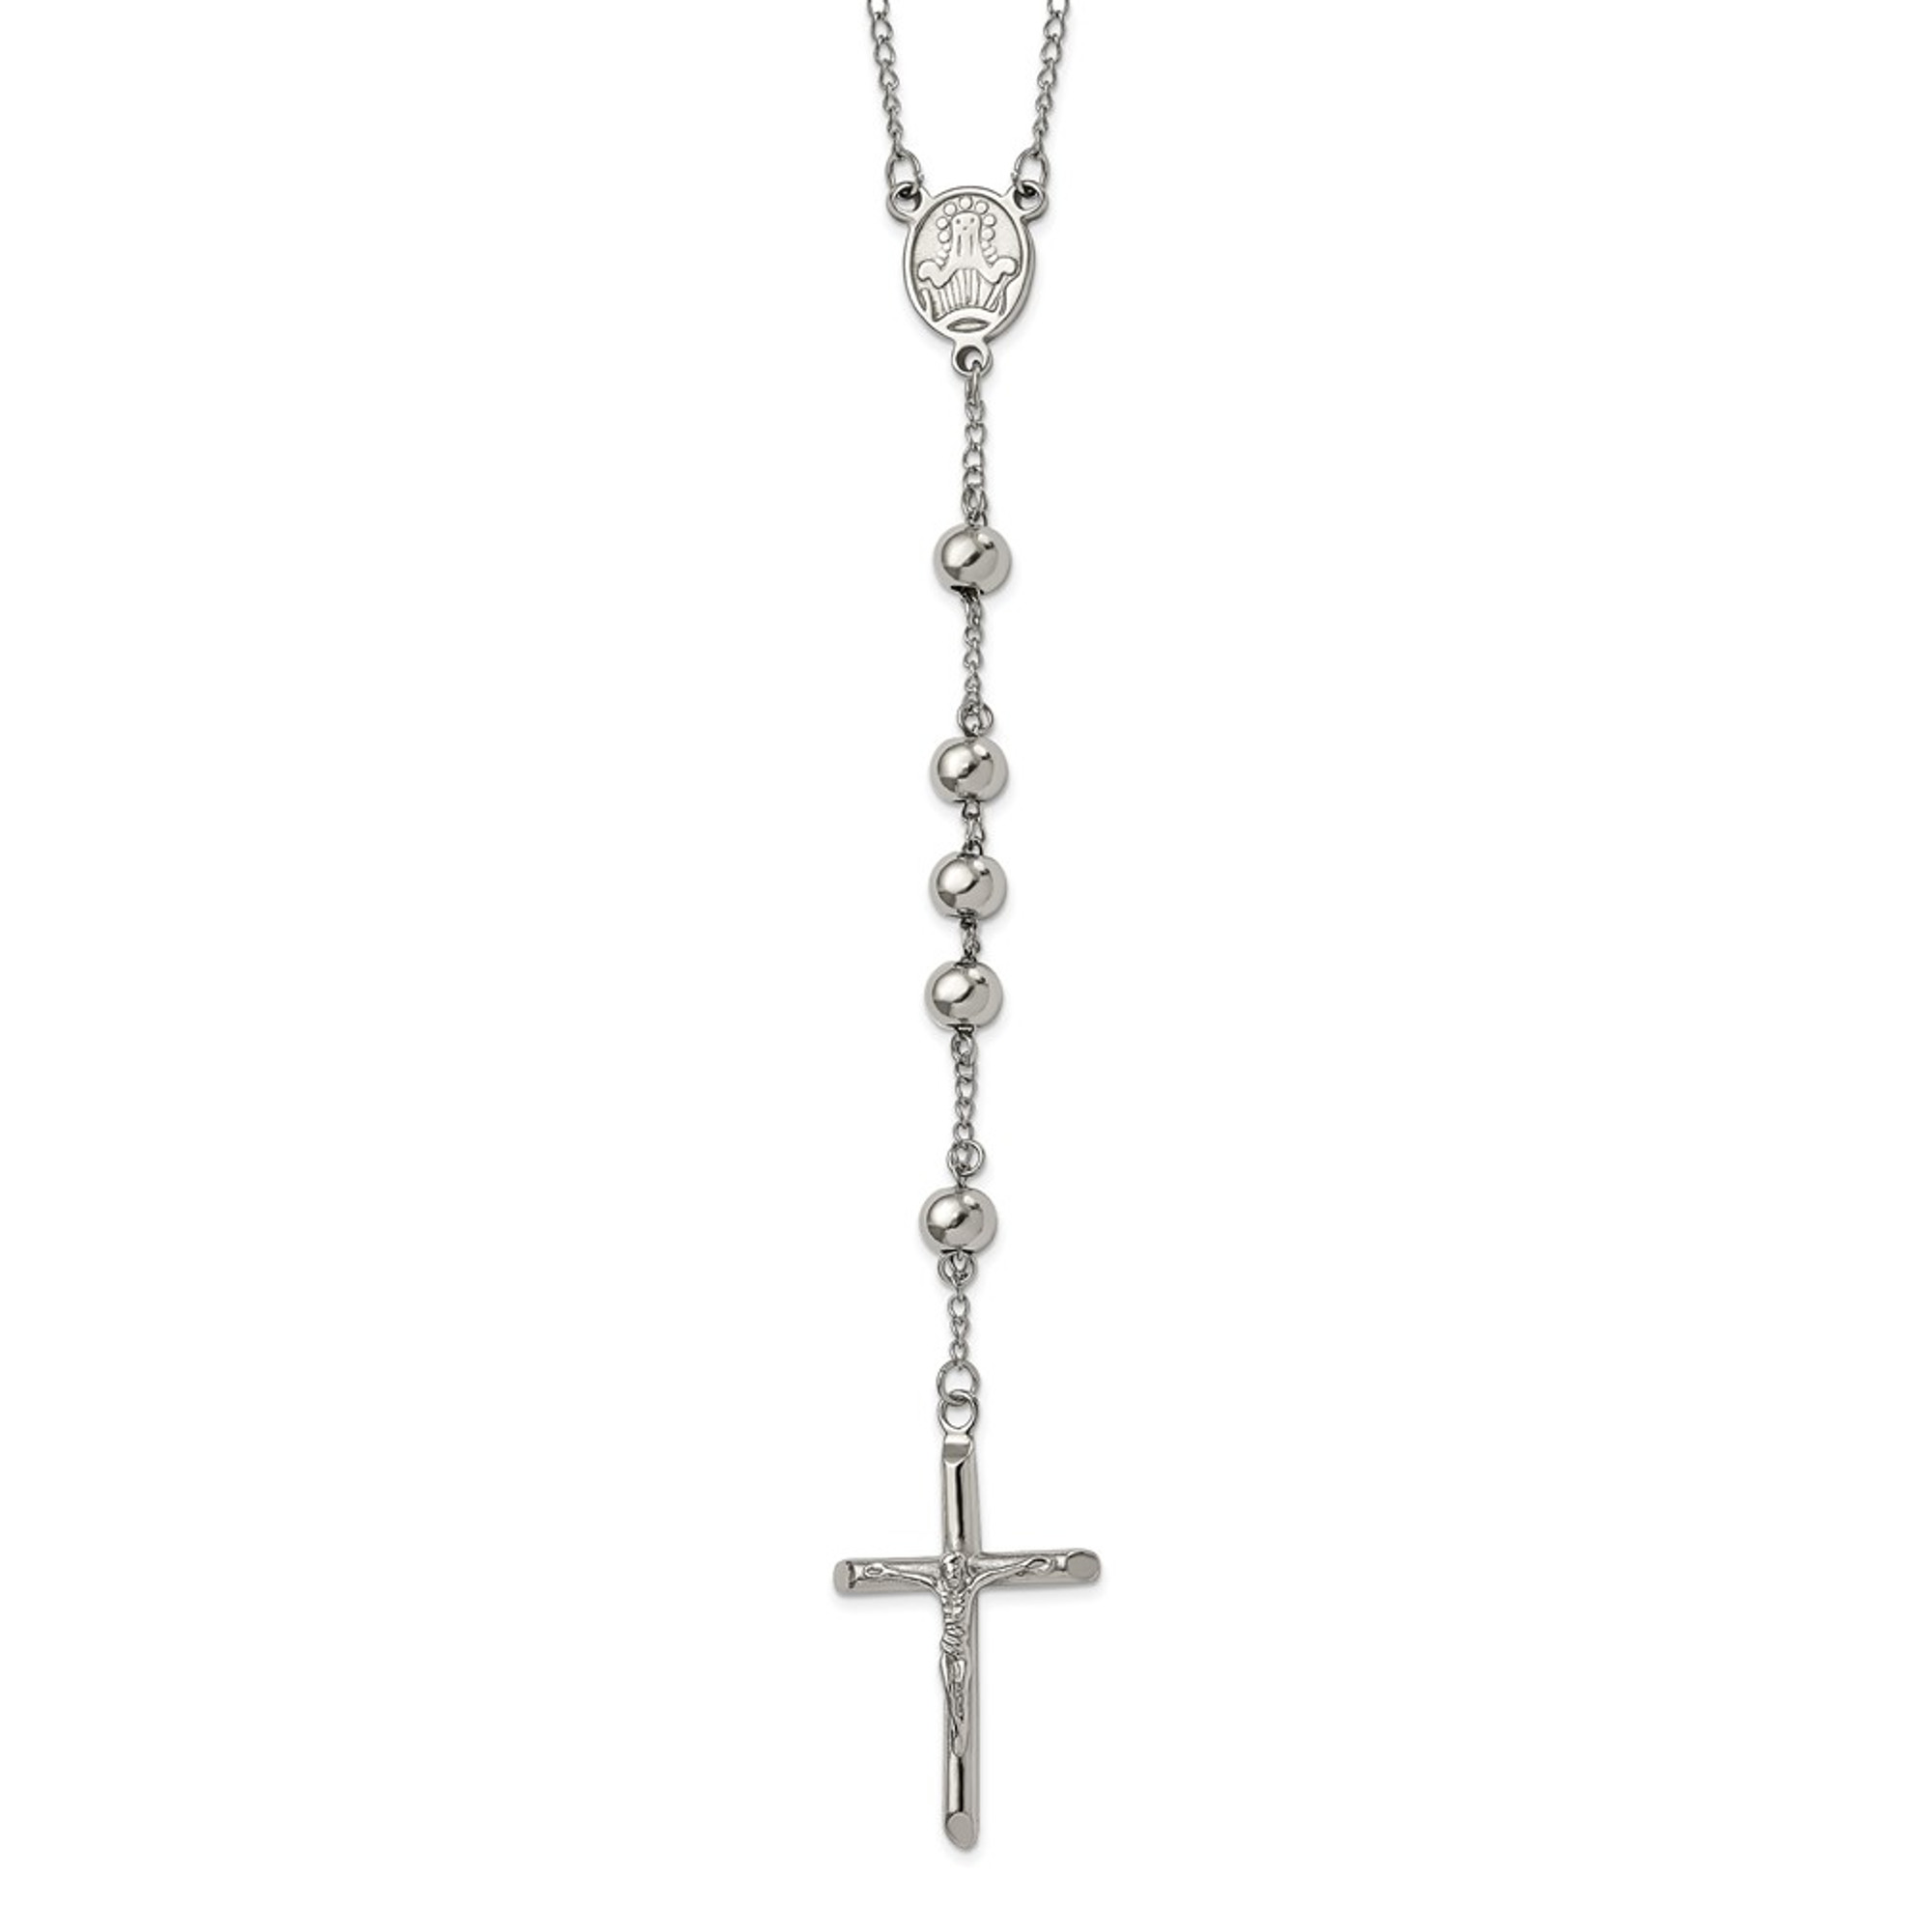 Buy CZARDONIC Christian Rosary Beads Silver Stainless Steel Jesus Cross  Pendant | Necklace For Men and Women | Stylish & Fancy Neckpiece for All  Occasion (Crystal Black) at Amazon.in